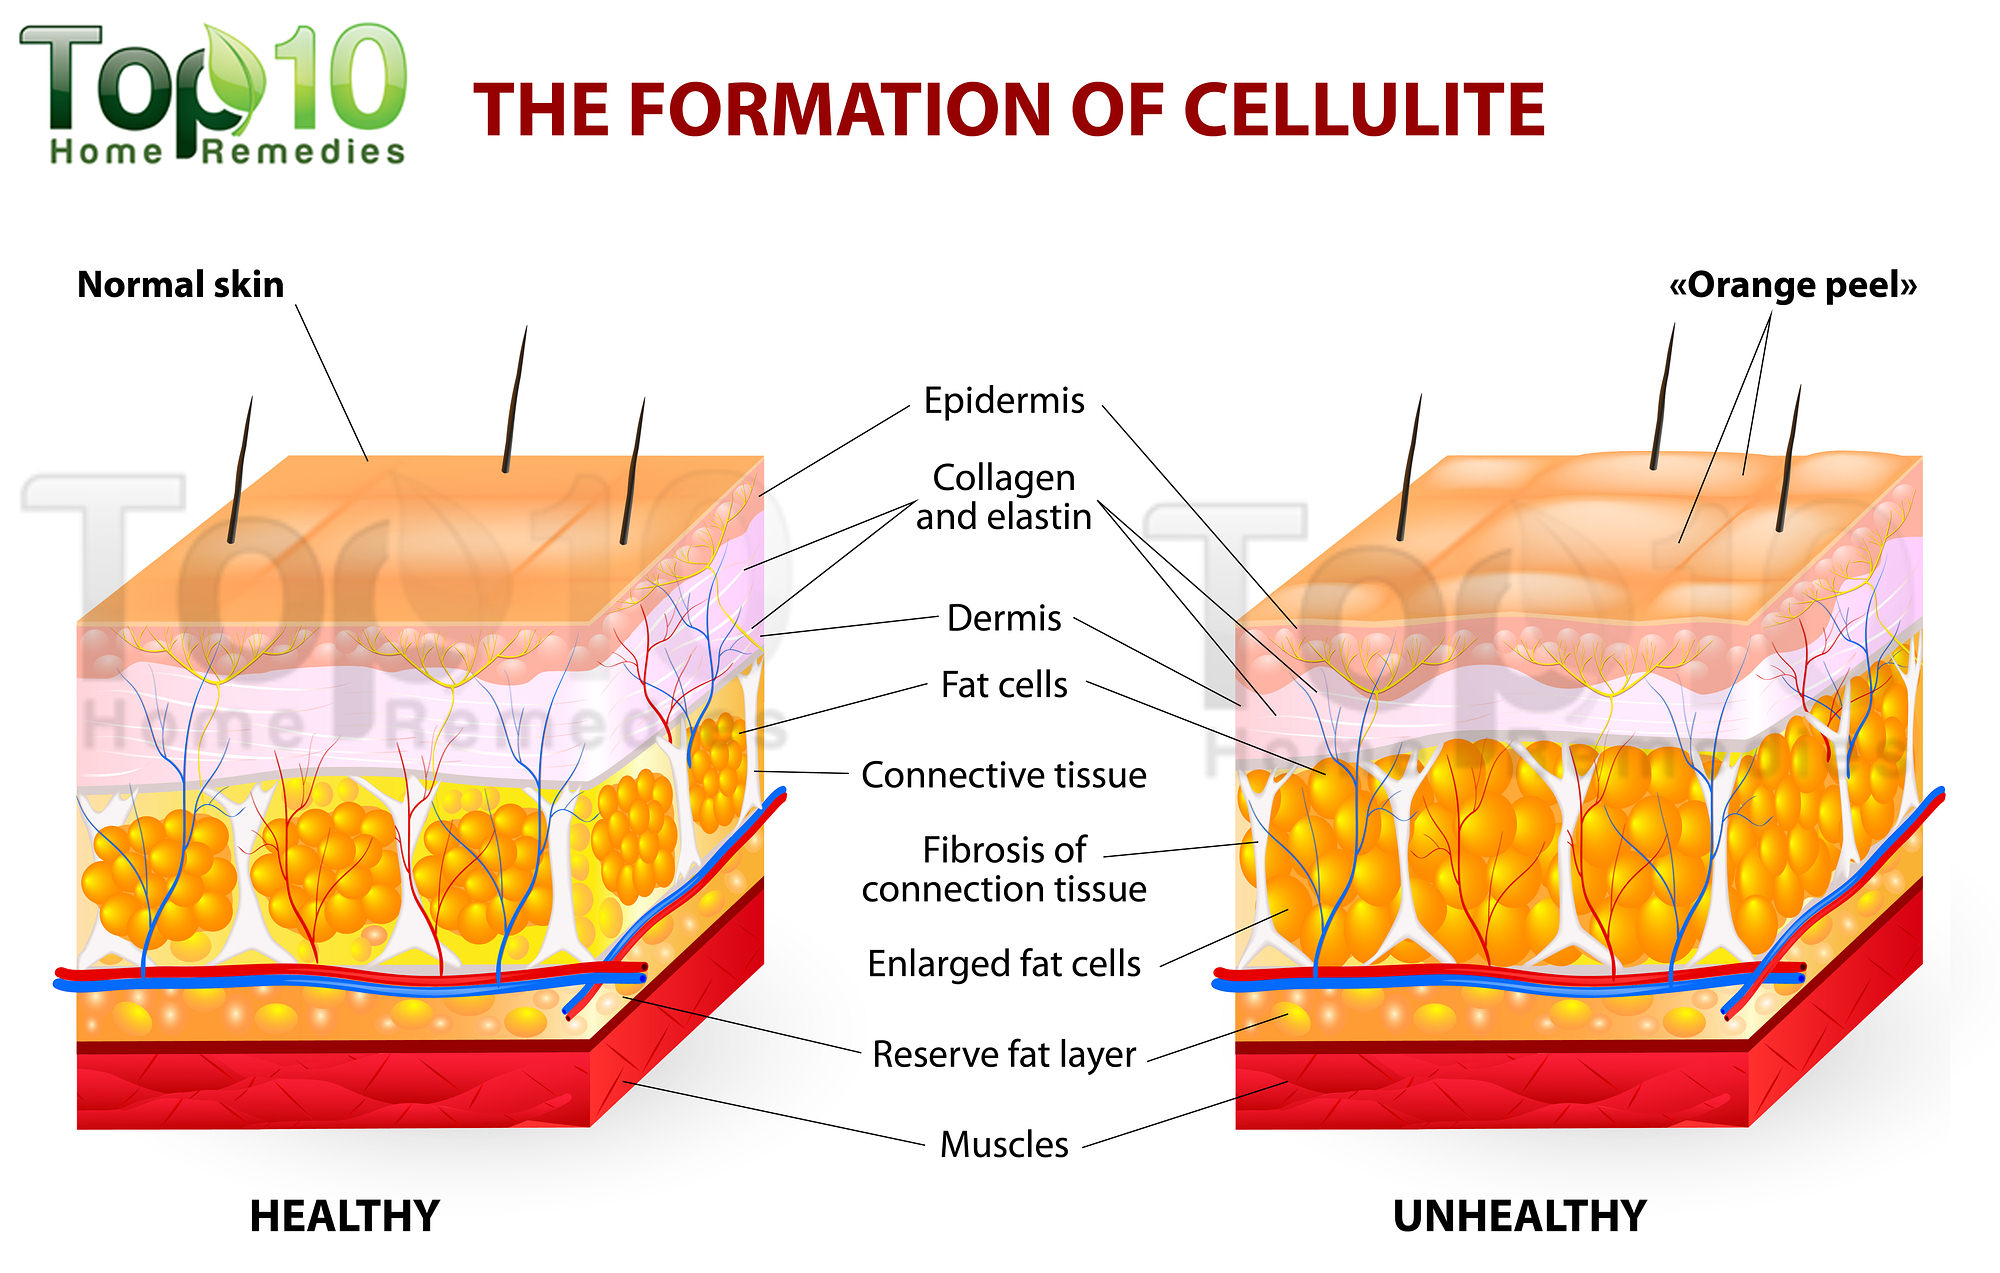 How To Remove The Cellulite Home Remedies Cellulite Treatments - Imag